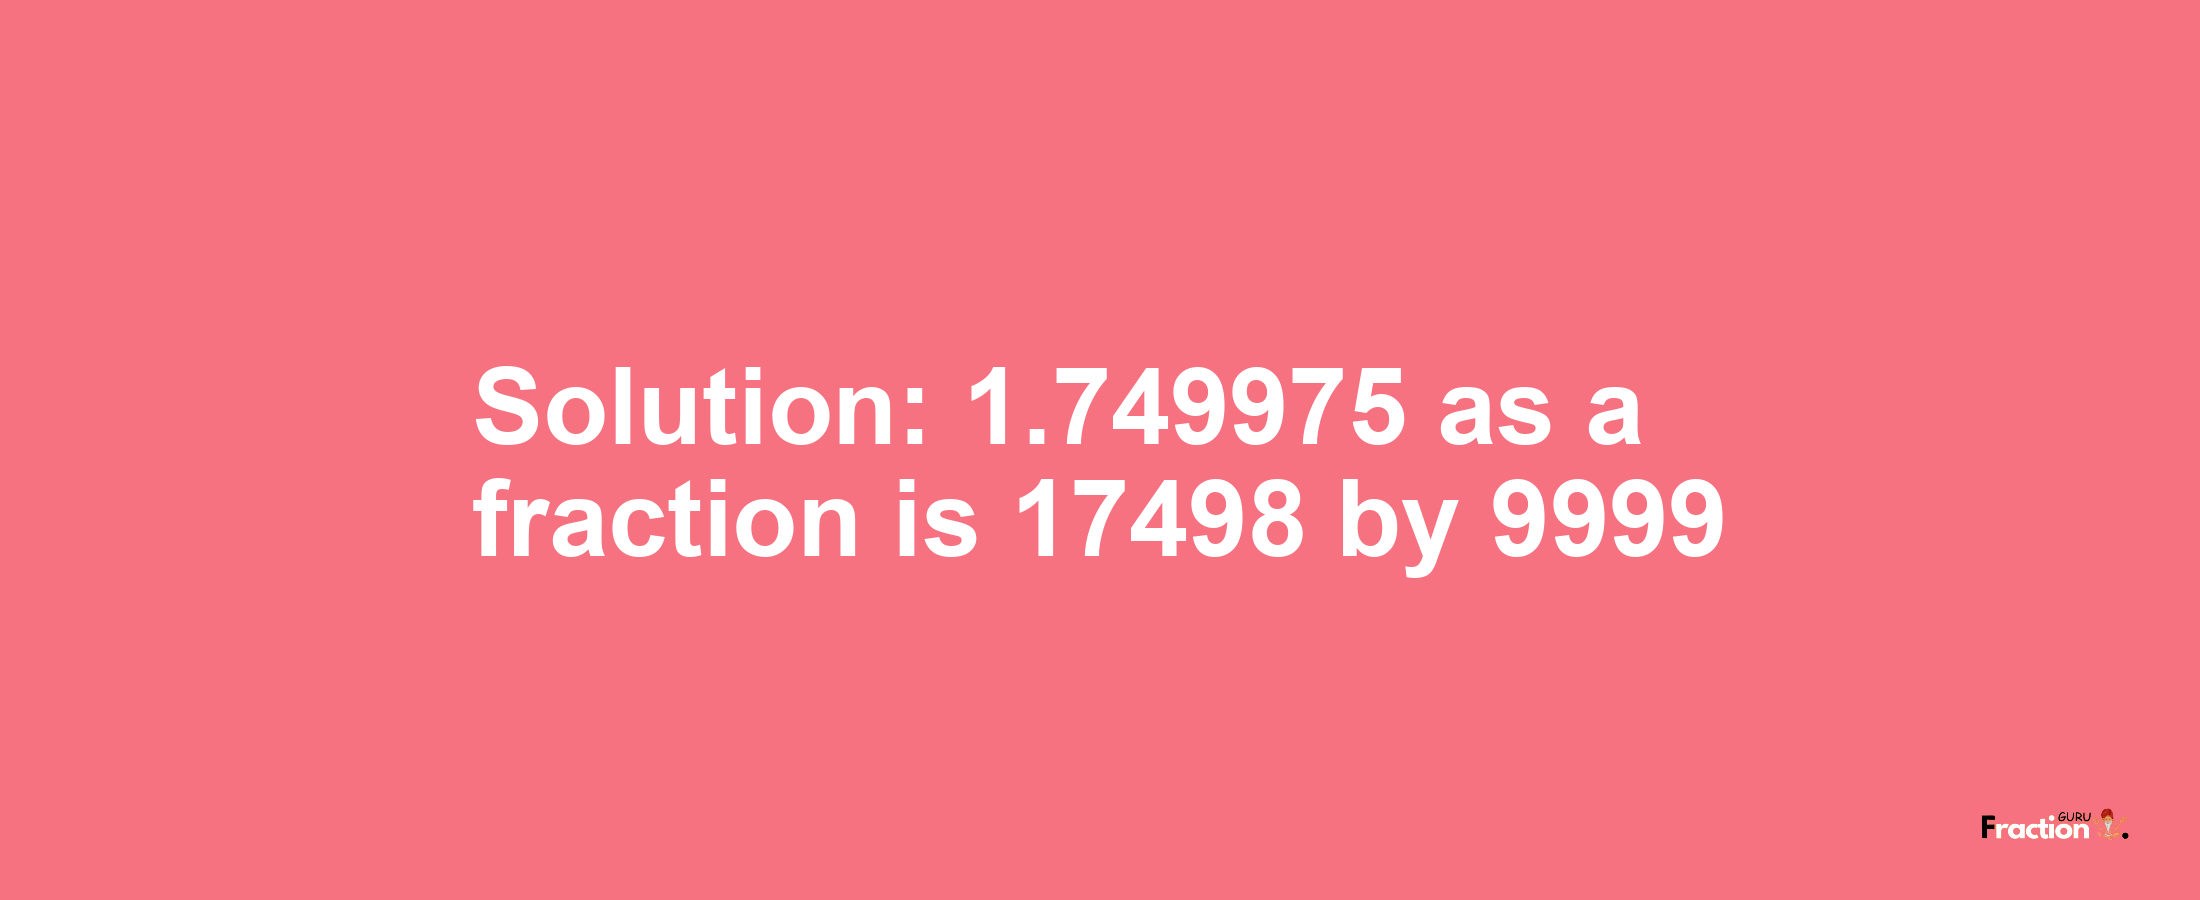 Solution:1.749975 as a fraction is 17498/9999